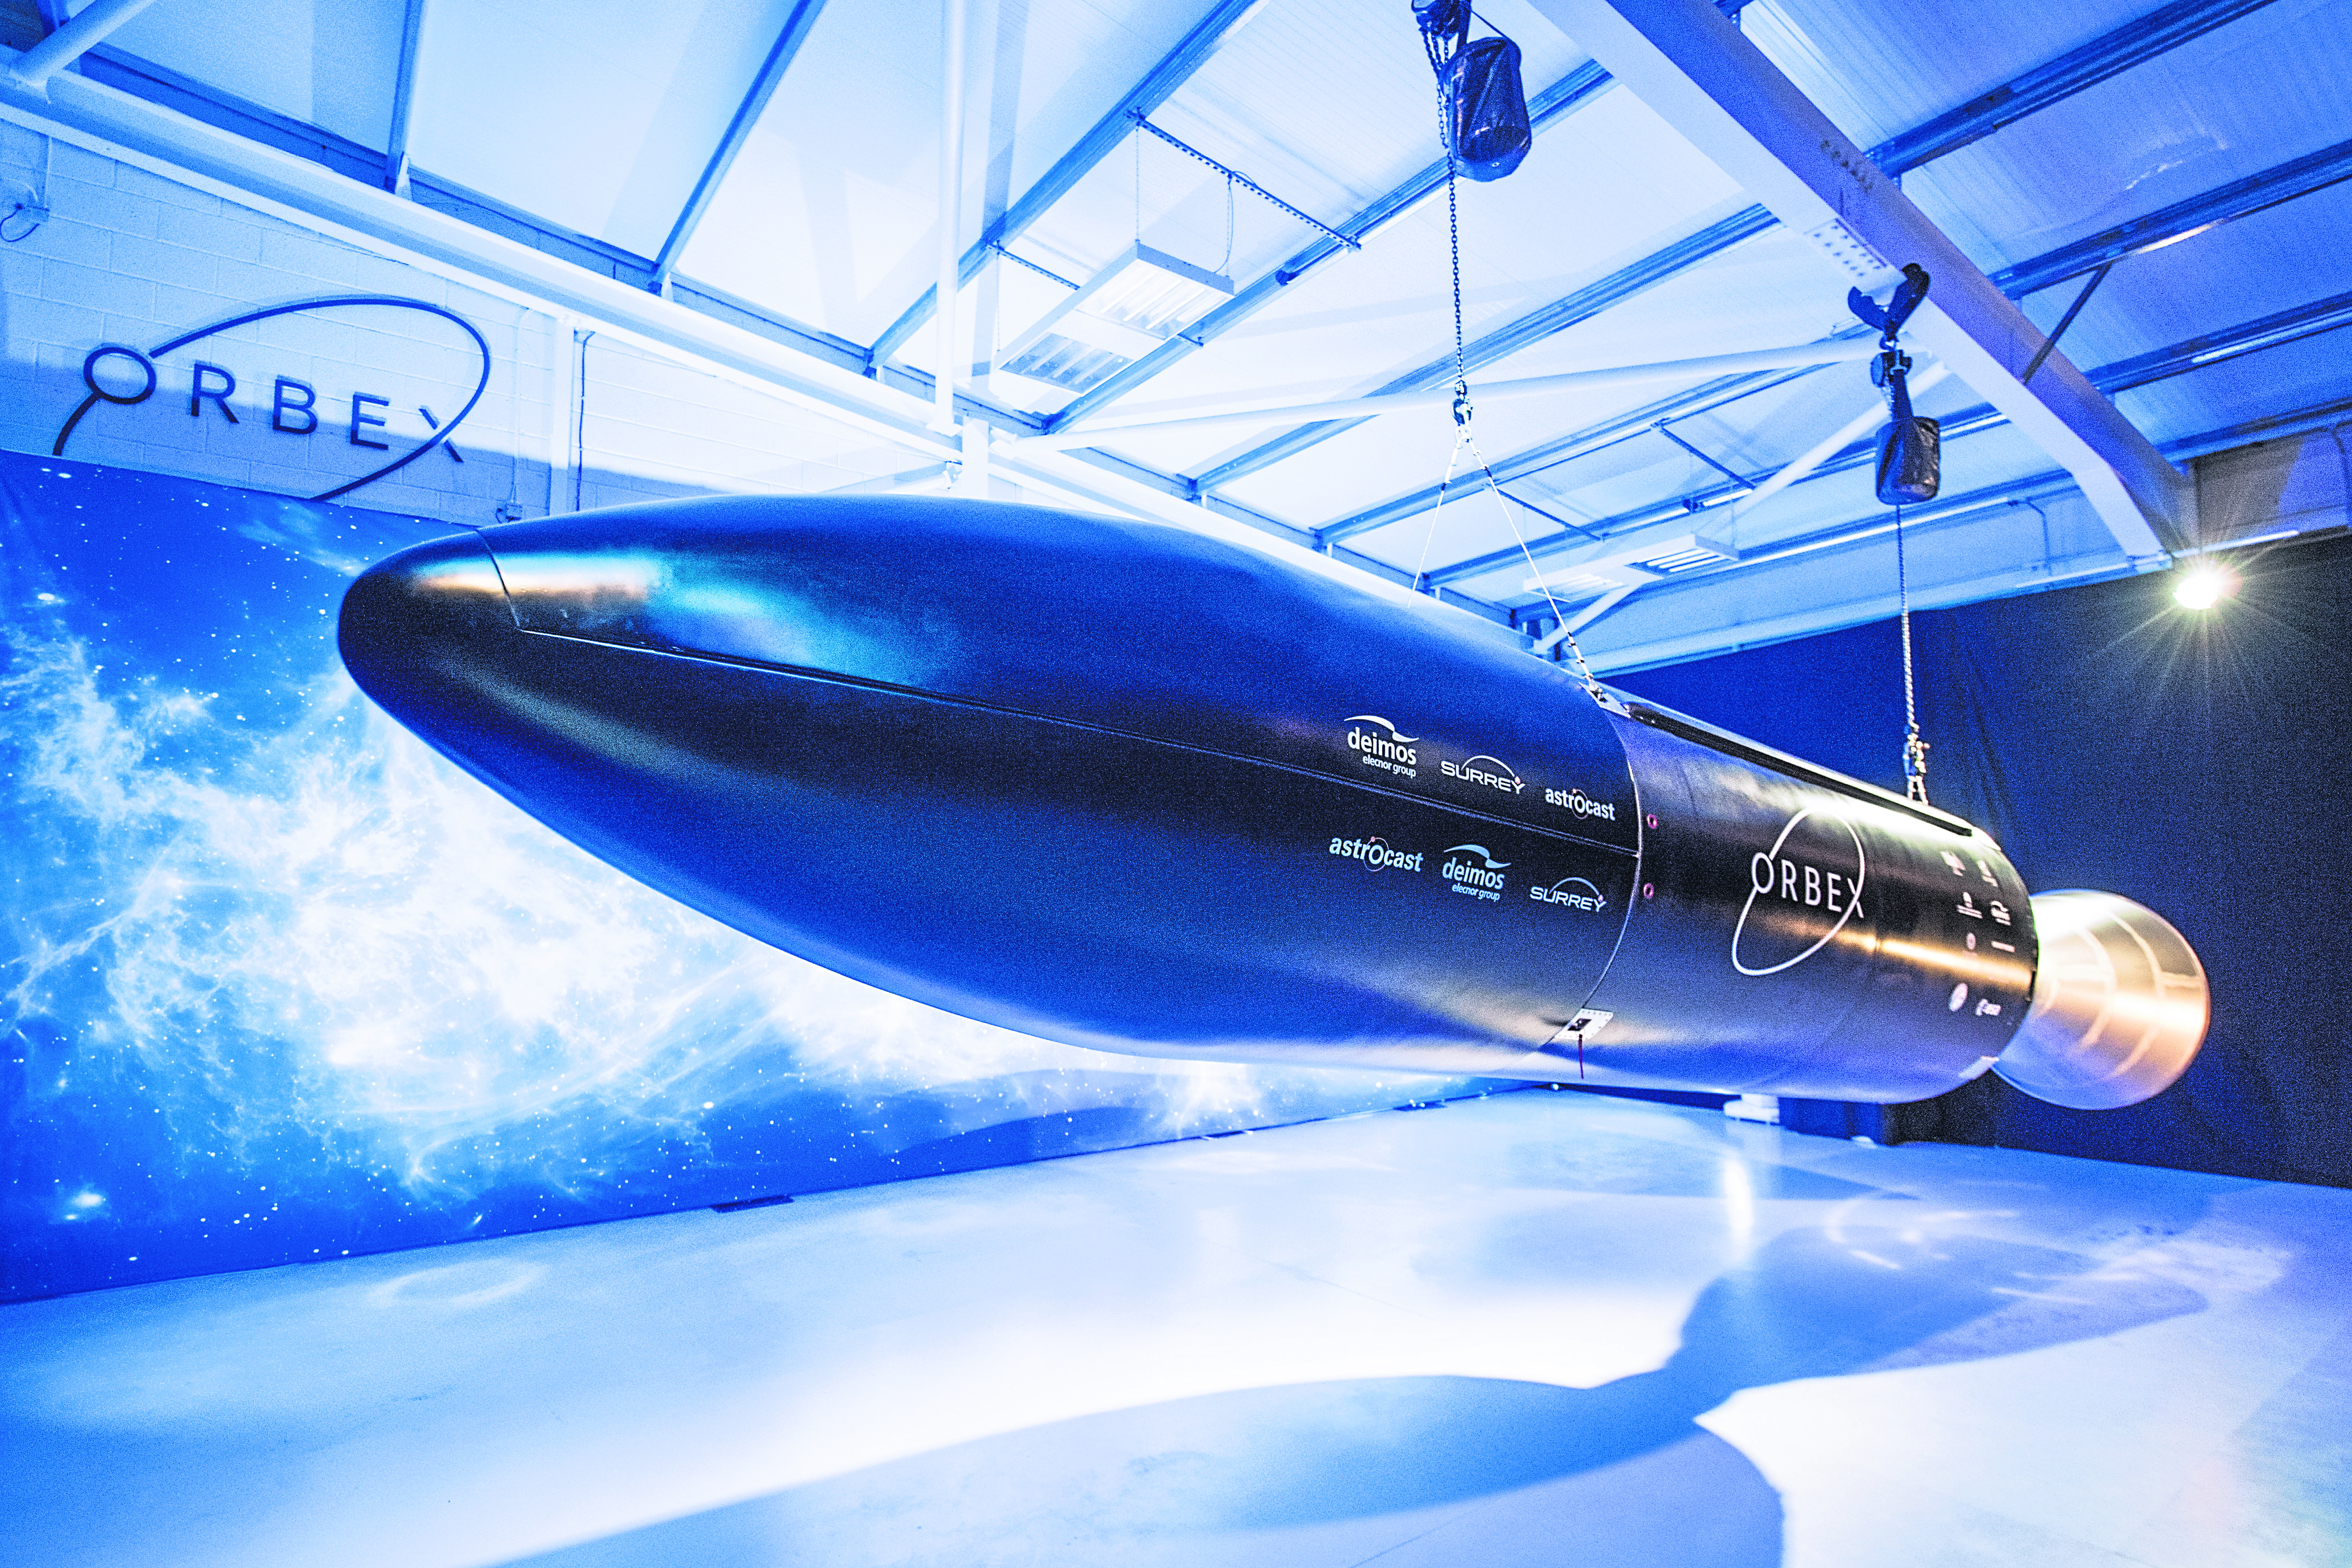 Orbex unveiled their Prime Rocket at their Forres facility back in March.